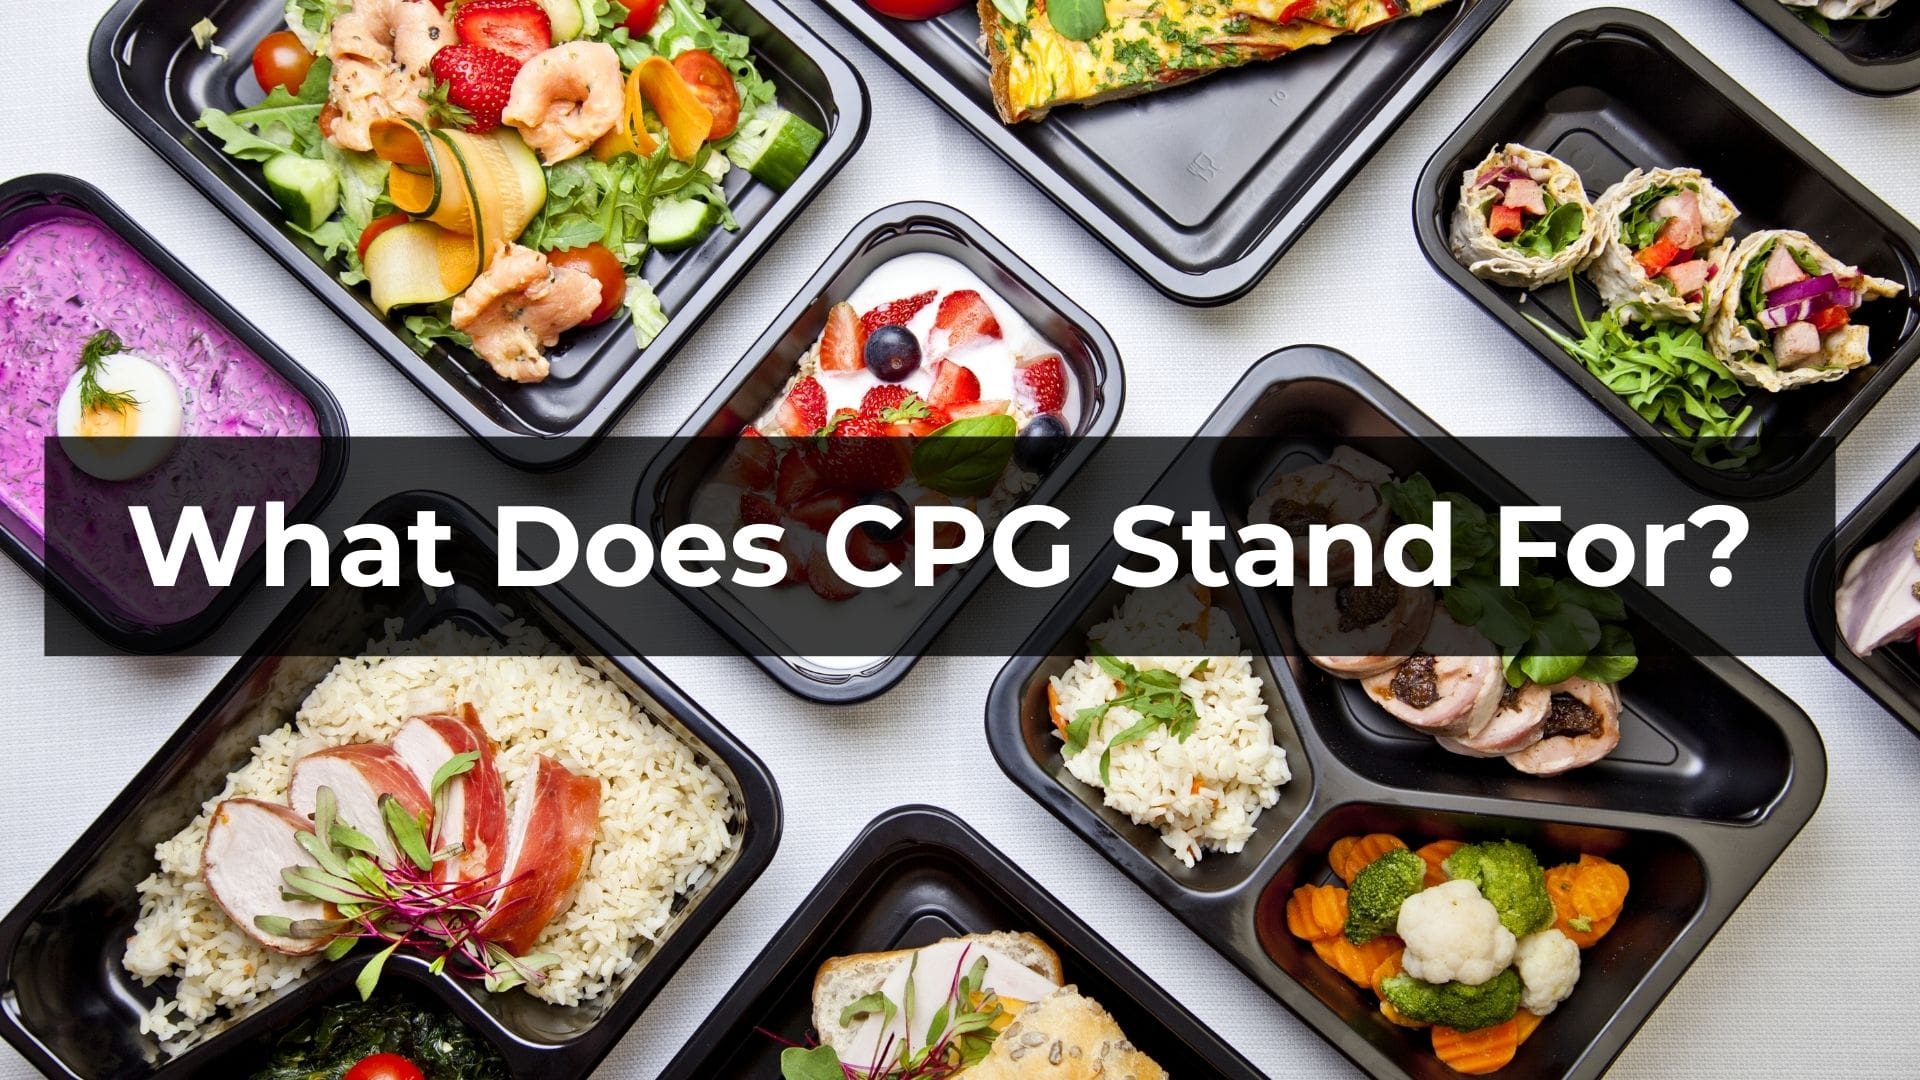 What Does CPG Stand For In Marketing?